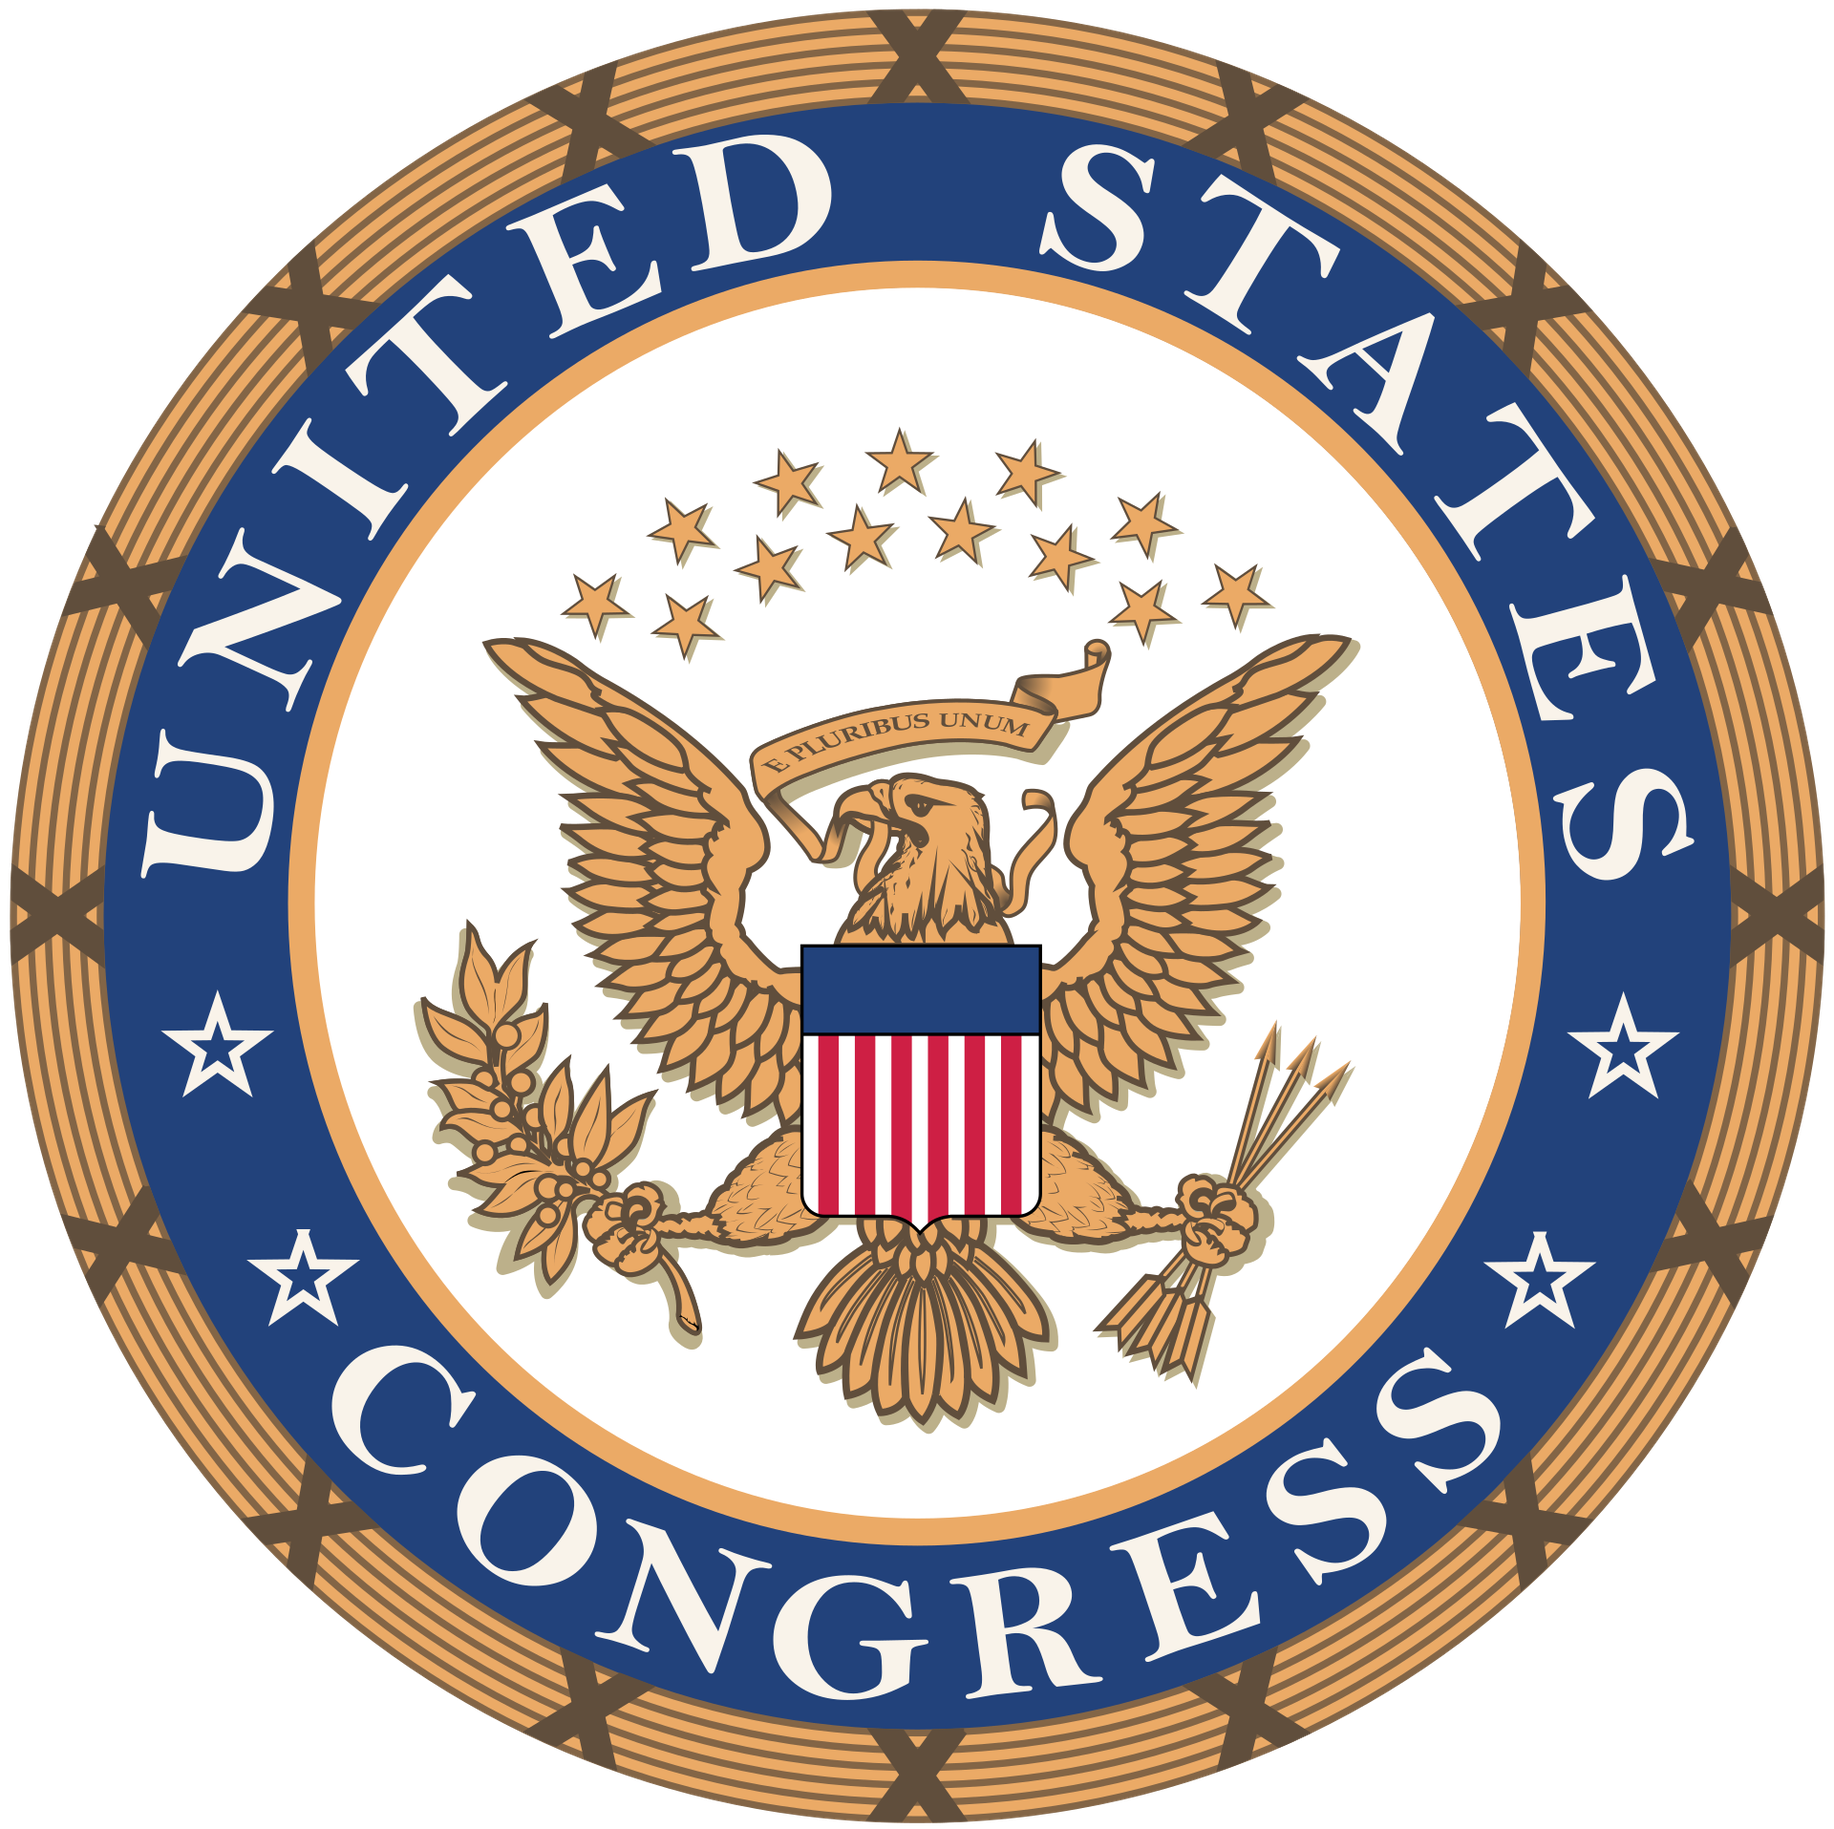 The ALT should read Seal of the United States Congress By Ipankonin - Vectorized fromSVG elements from 50px, Public Domain, File:Seal of the United States Congress.svg